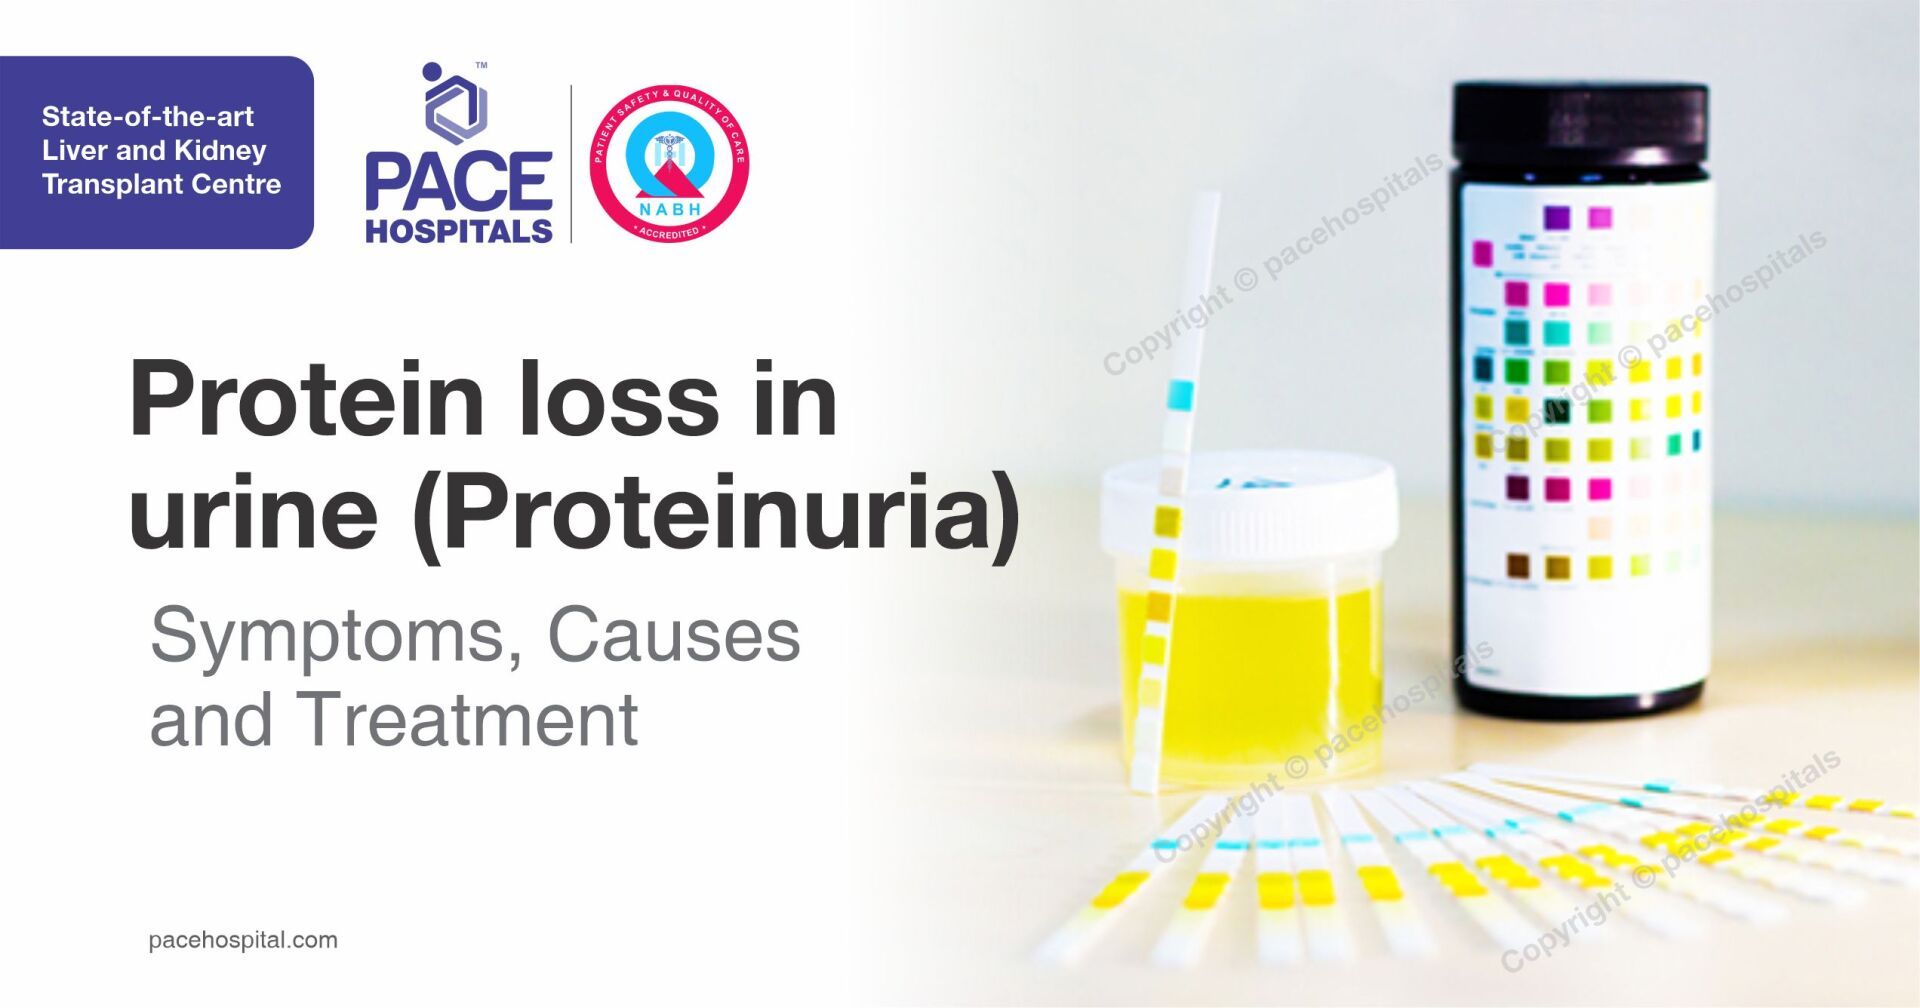 Protein loss in urine (Proteinuria) - Symptoms, Causes and Treatment